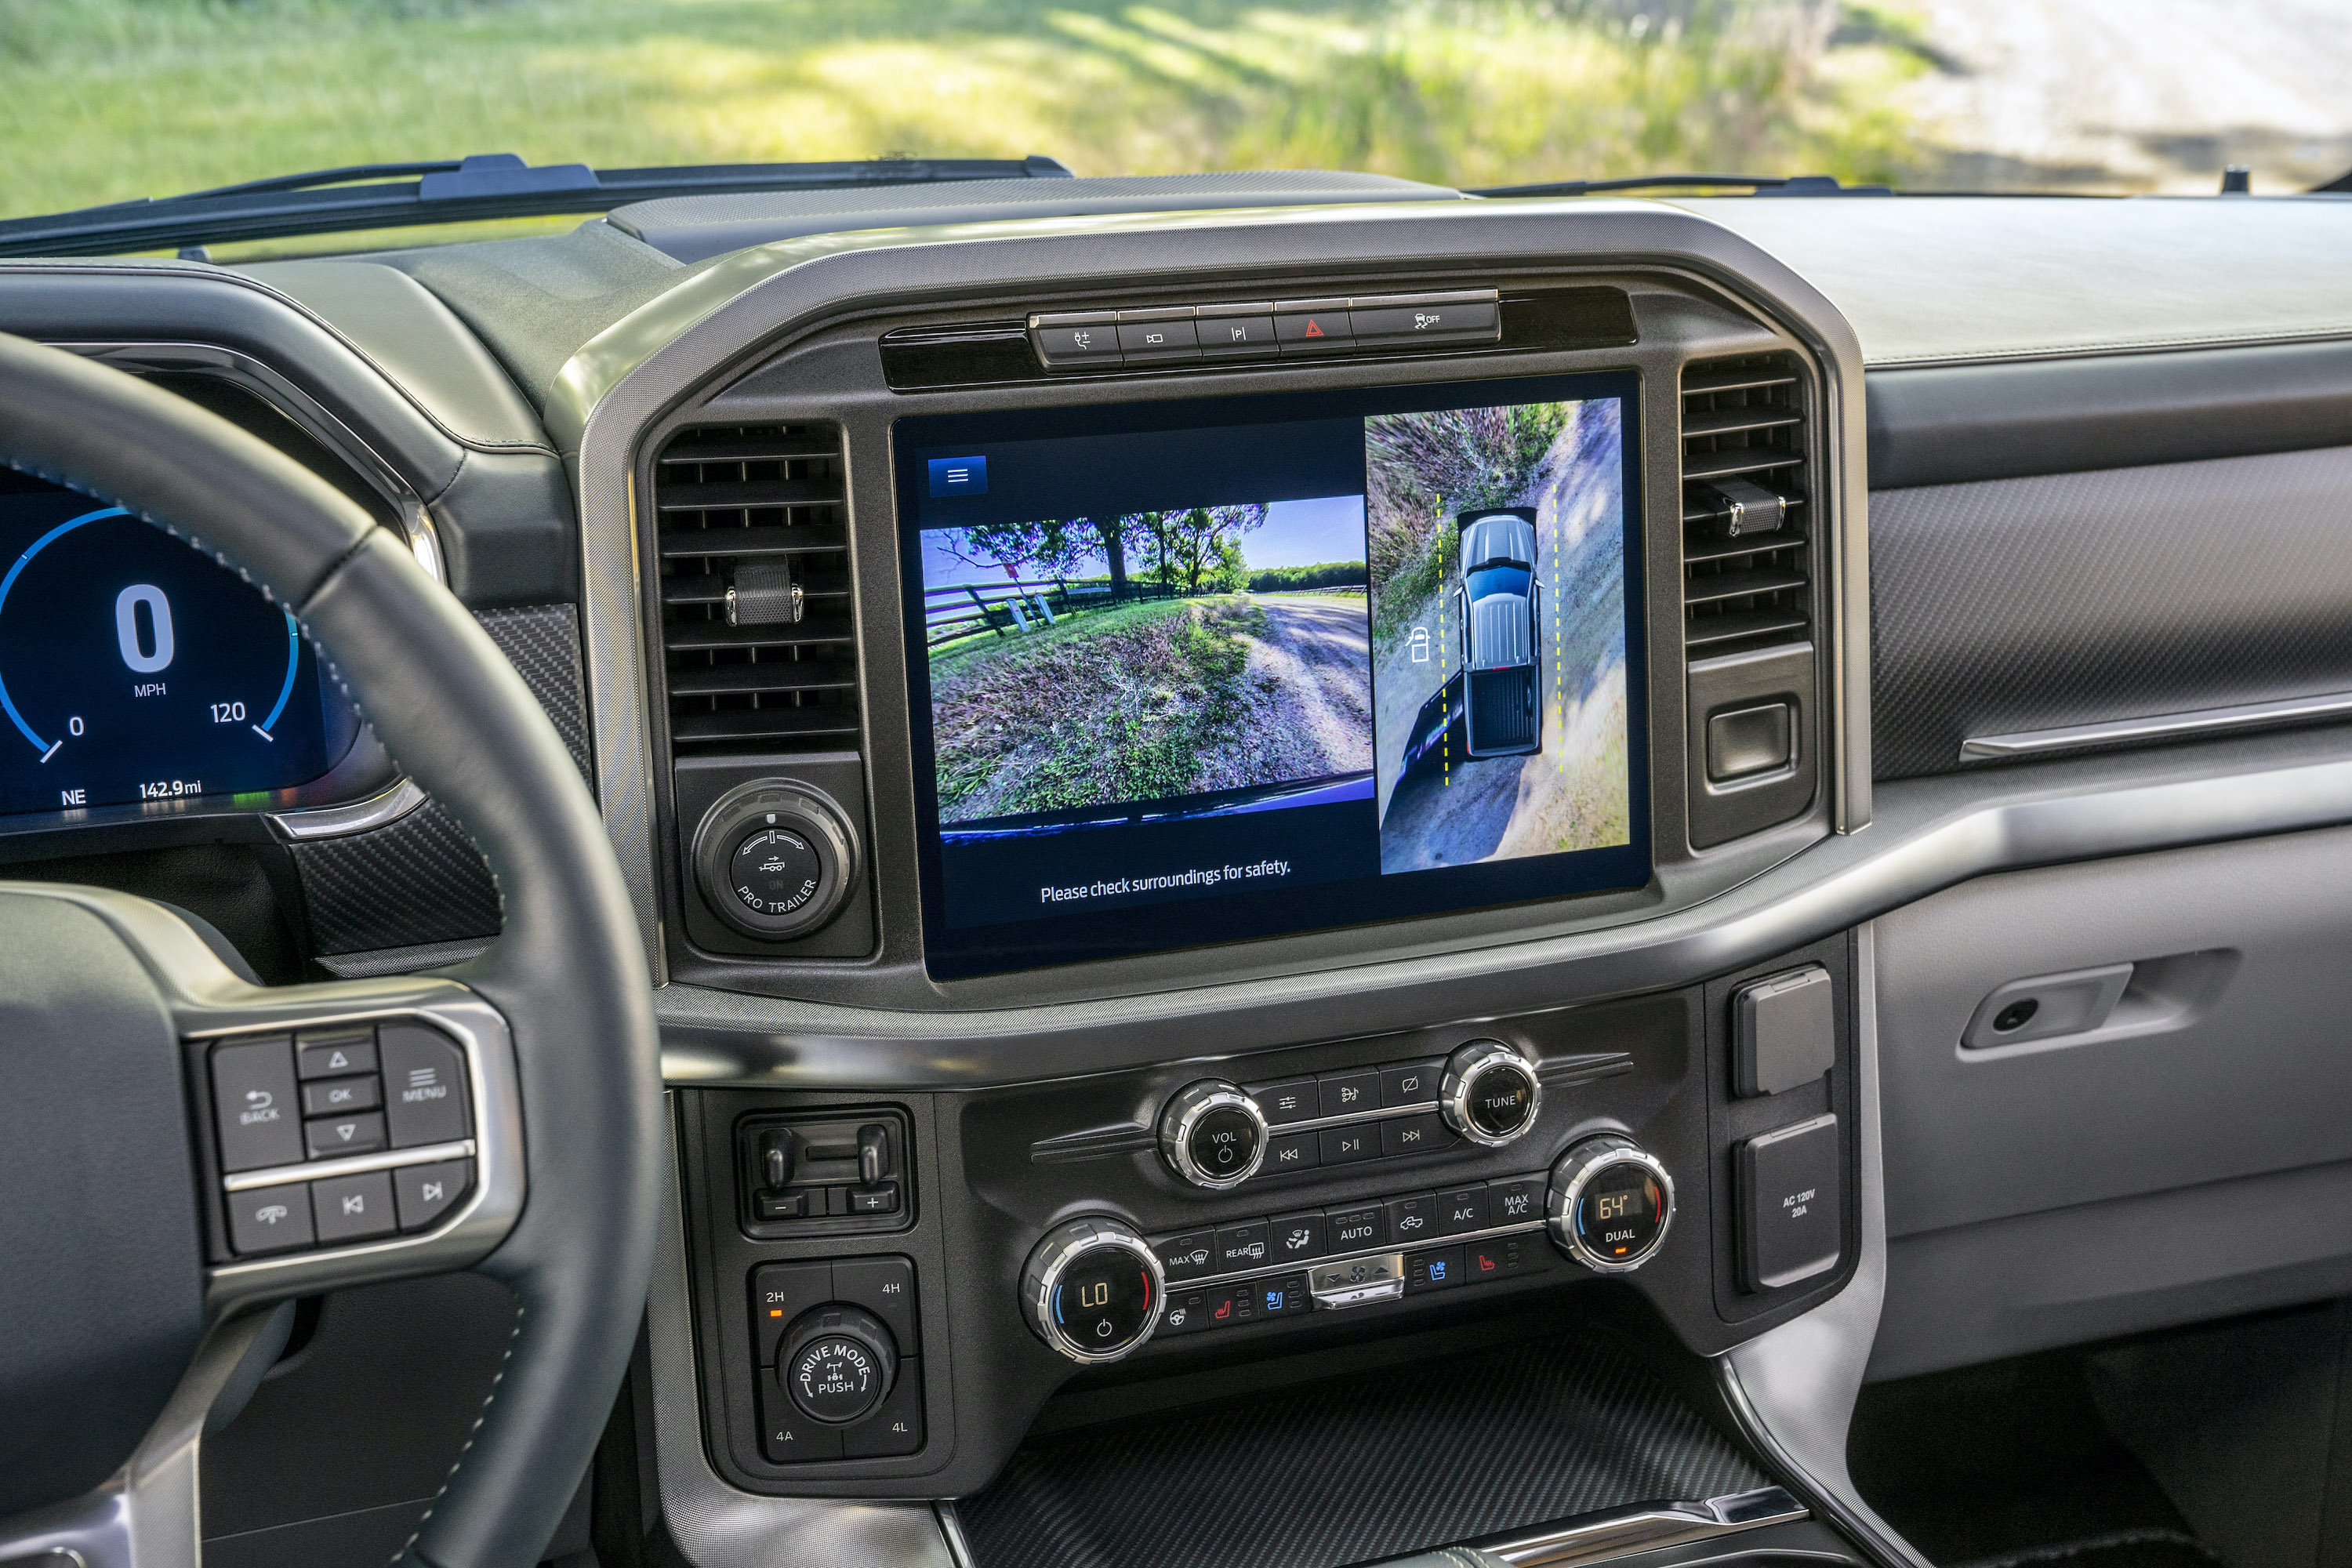 Available 12-inch center screen utilizes ﬁve high-resolution cameras to provide multiple views including a 360-degree overhead view to make maneuvering in tight spaces easy.